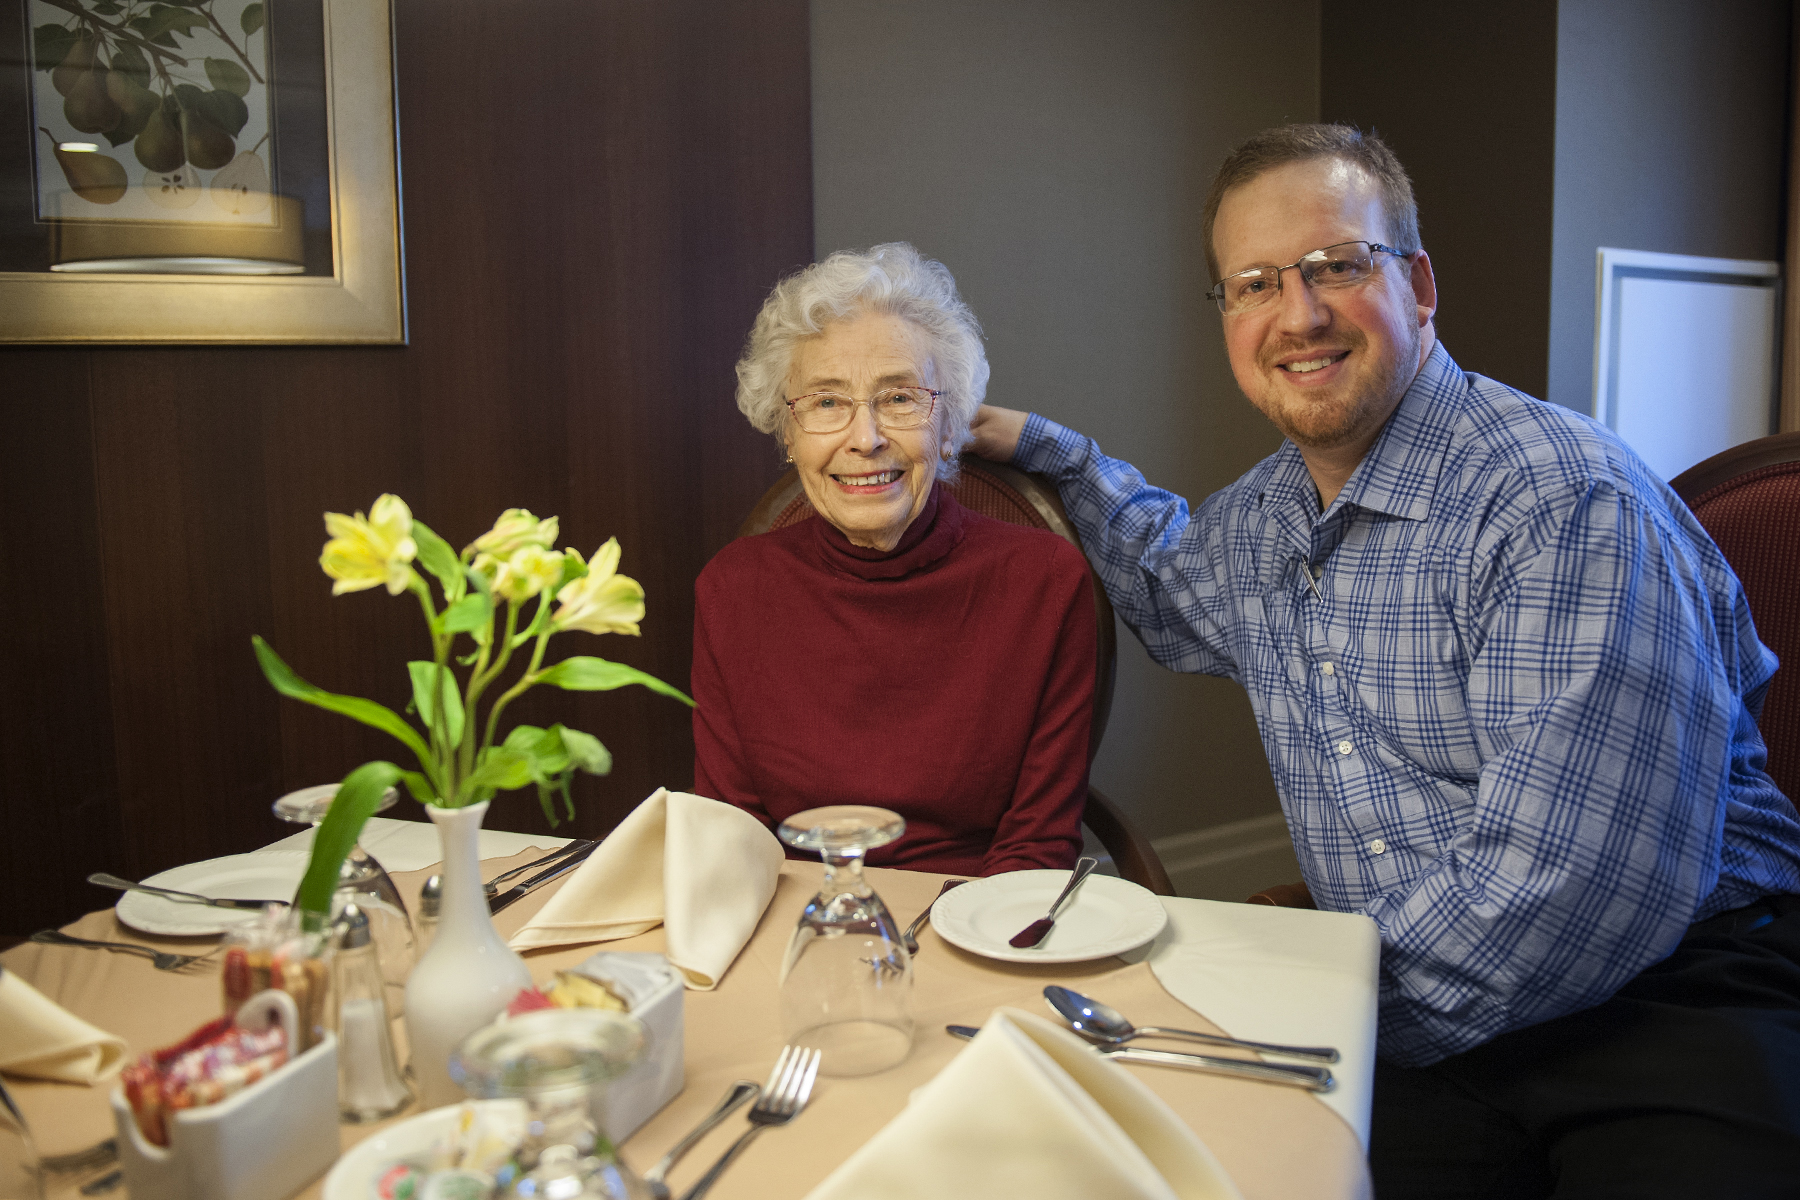 Hospitality worker and resident of a retirement home seated at a dining table